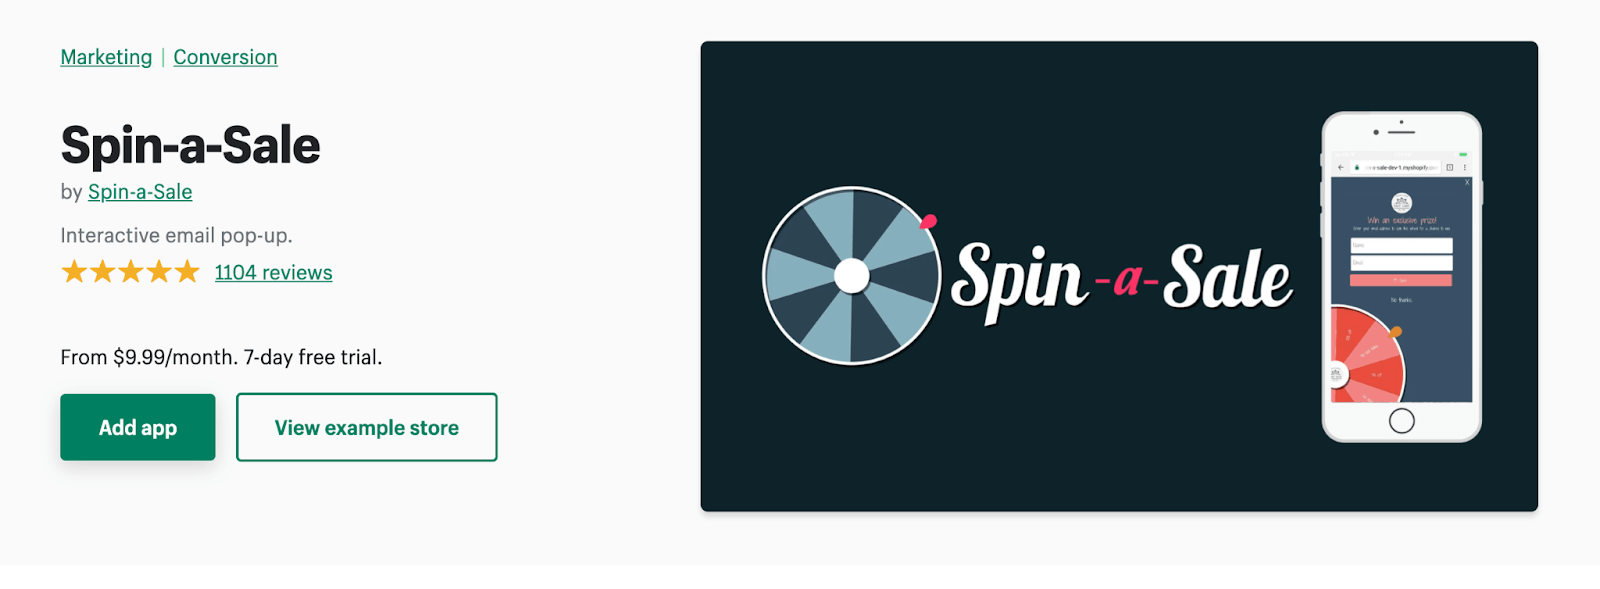 Shopify App Store- Spin-a-Sale- Conversion Rate